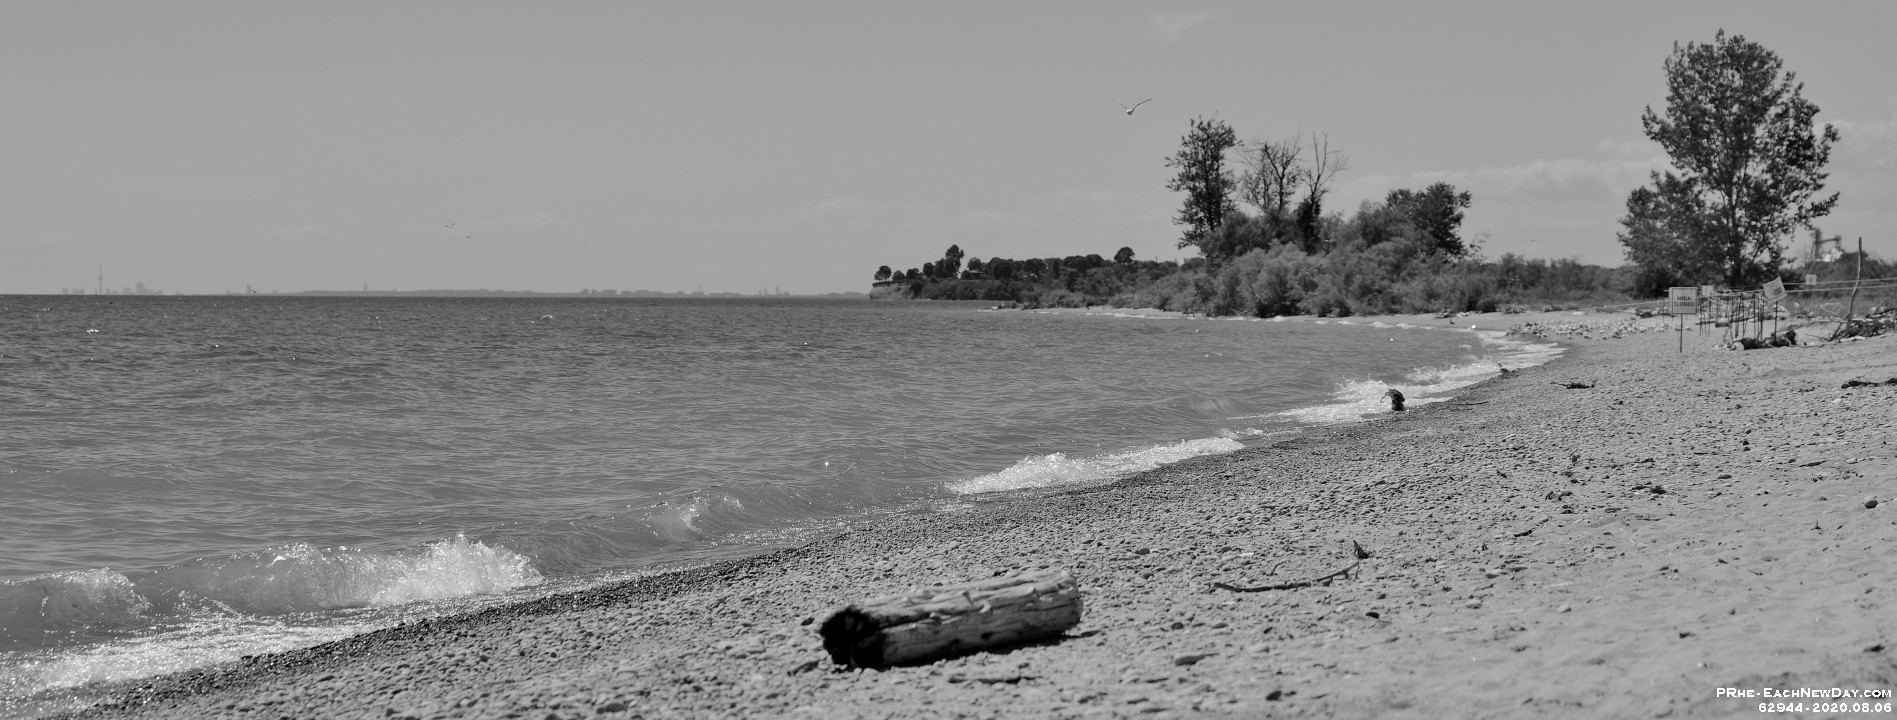 62944RoCrLeReShBw - Lunch on the beach at Darlington Provincial Park